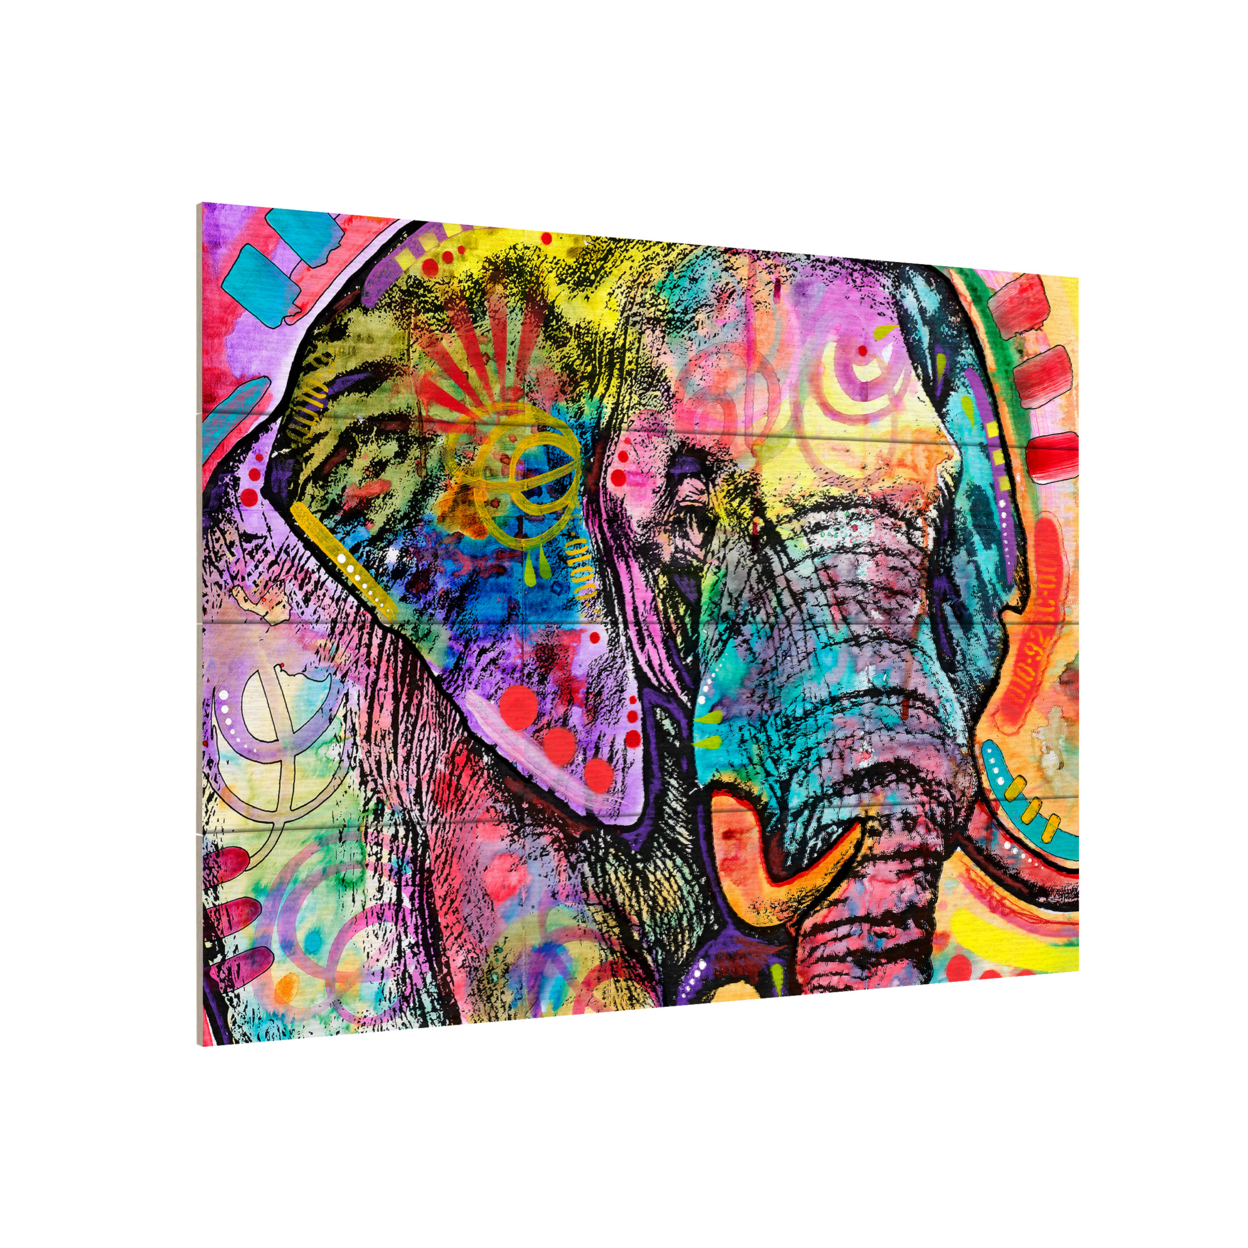 Wall Art 12 X 16 Inches Titled Elephant Ready To Hang Printed On Wooden Planks